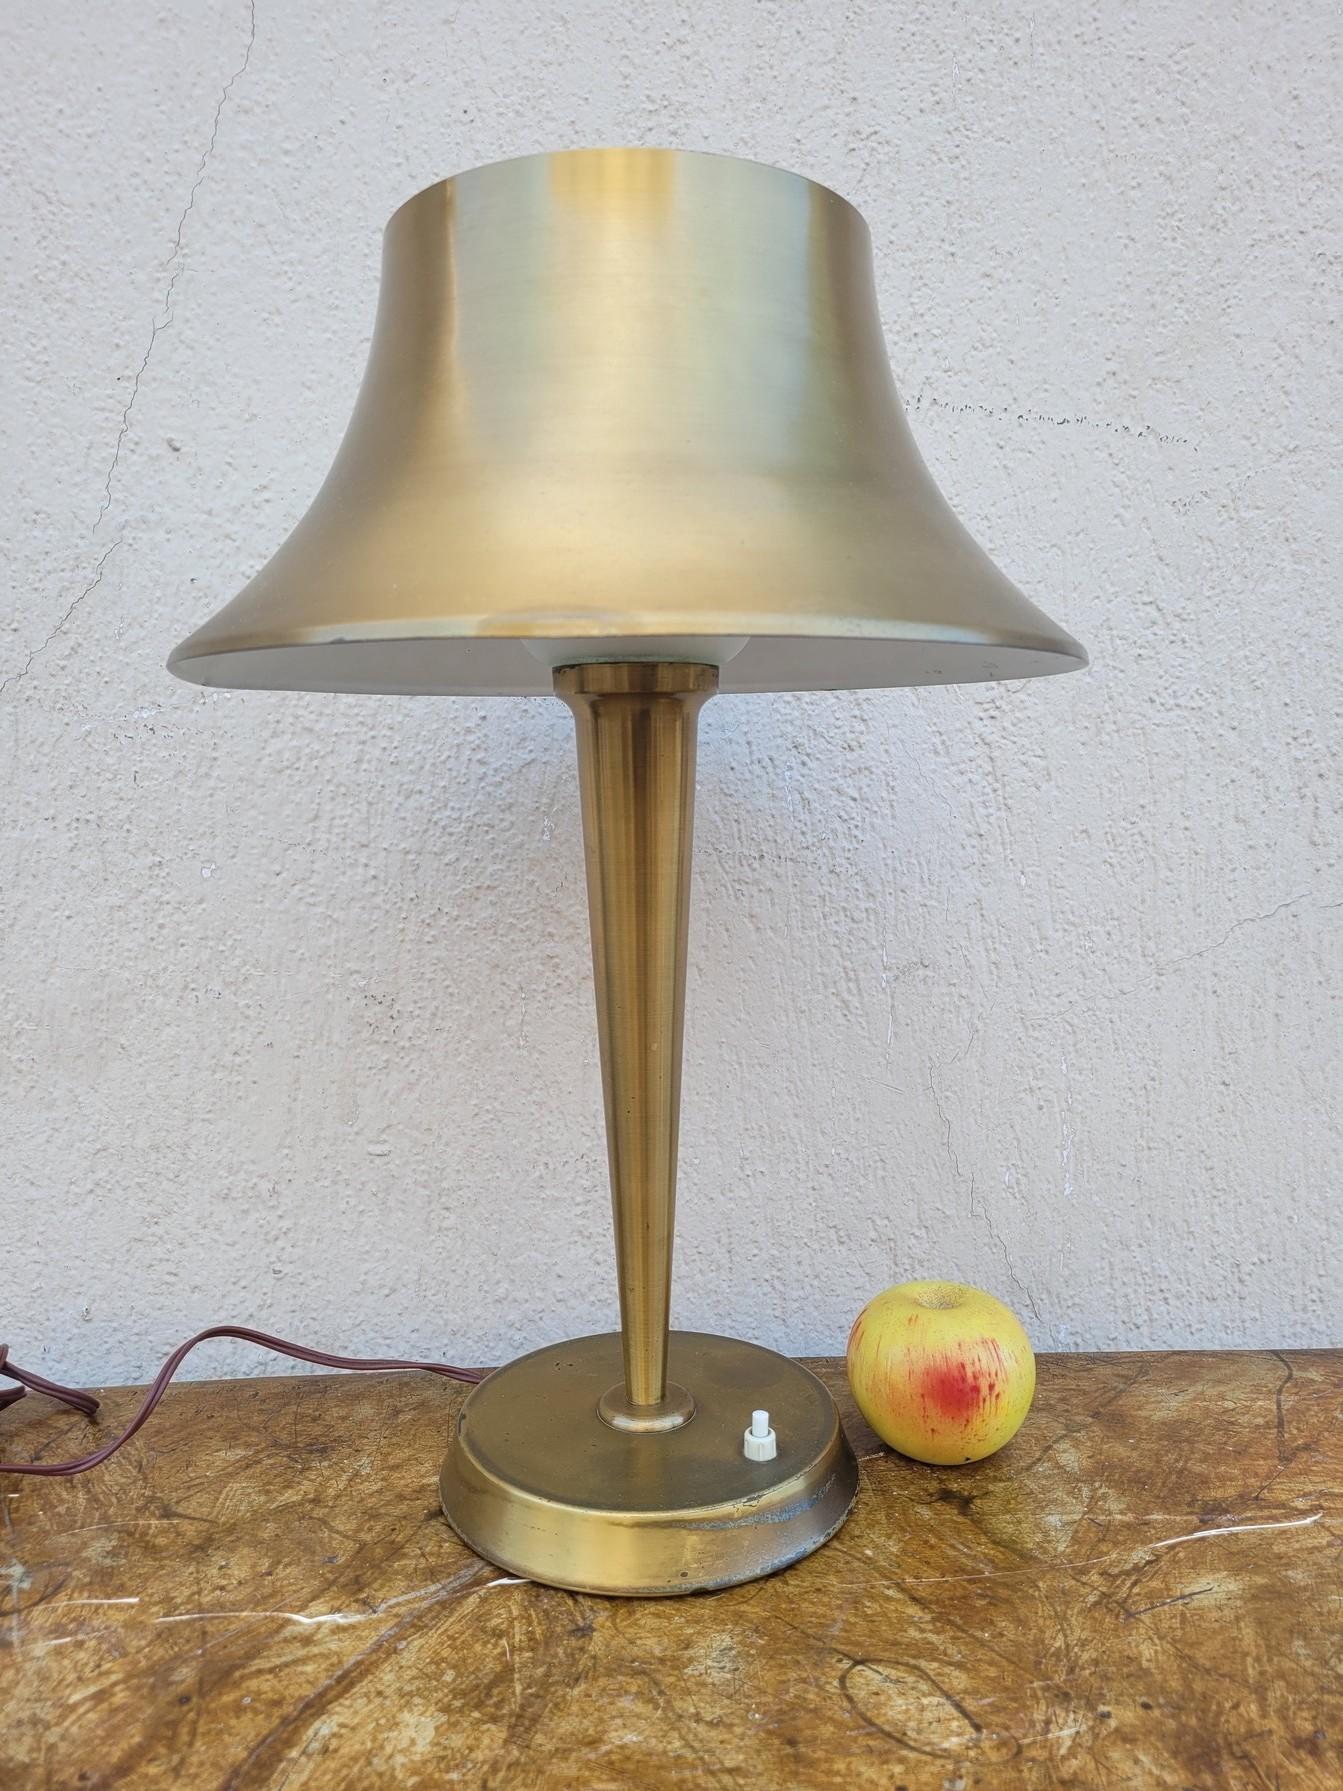 Beautiful brass table lamp, inverted cone foot and slightly curved lampshade; with its original sandblasted glass tulip

Good general condition, wear from use and slight shocks around the perimeter of the lampshade

Signed J Perzel

Old electricity